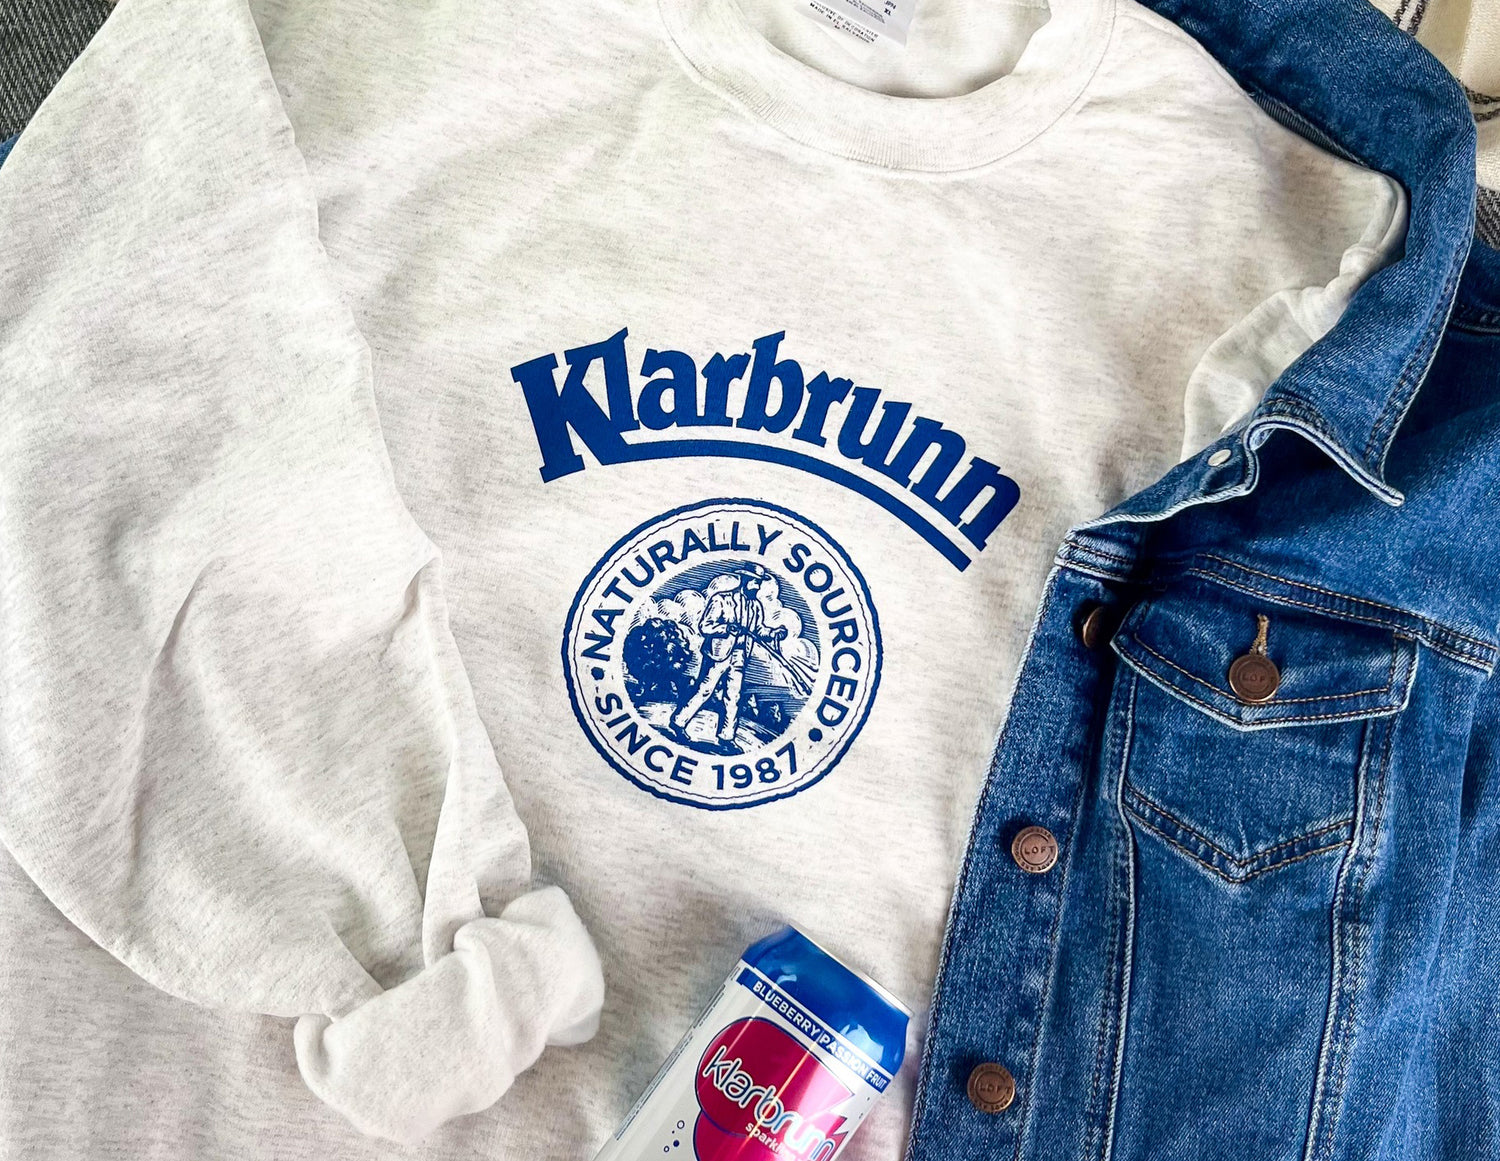 sweater with retro klarbrunn under jean jacket with can of klarbrunn on top